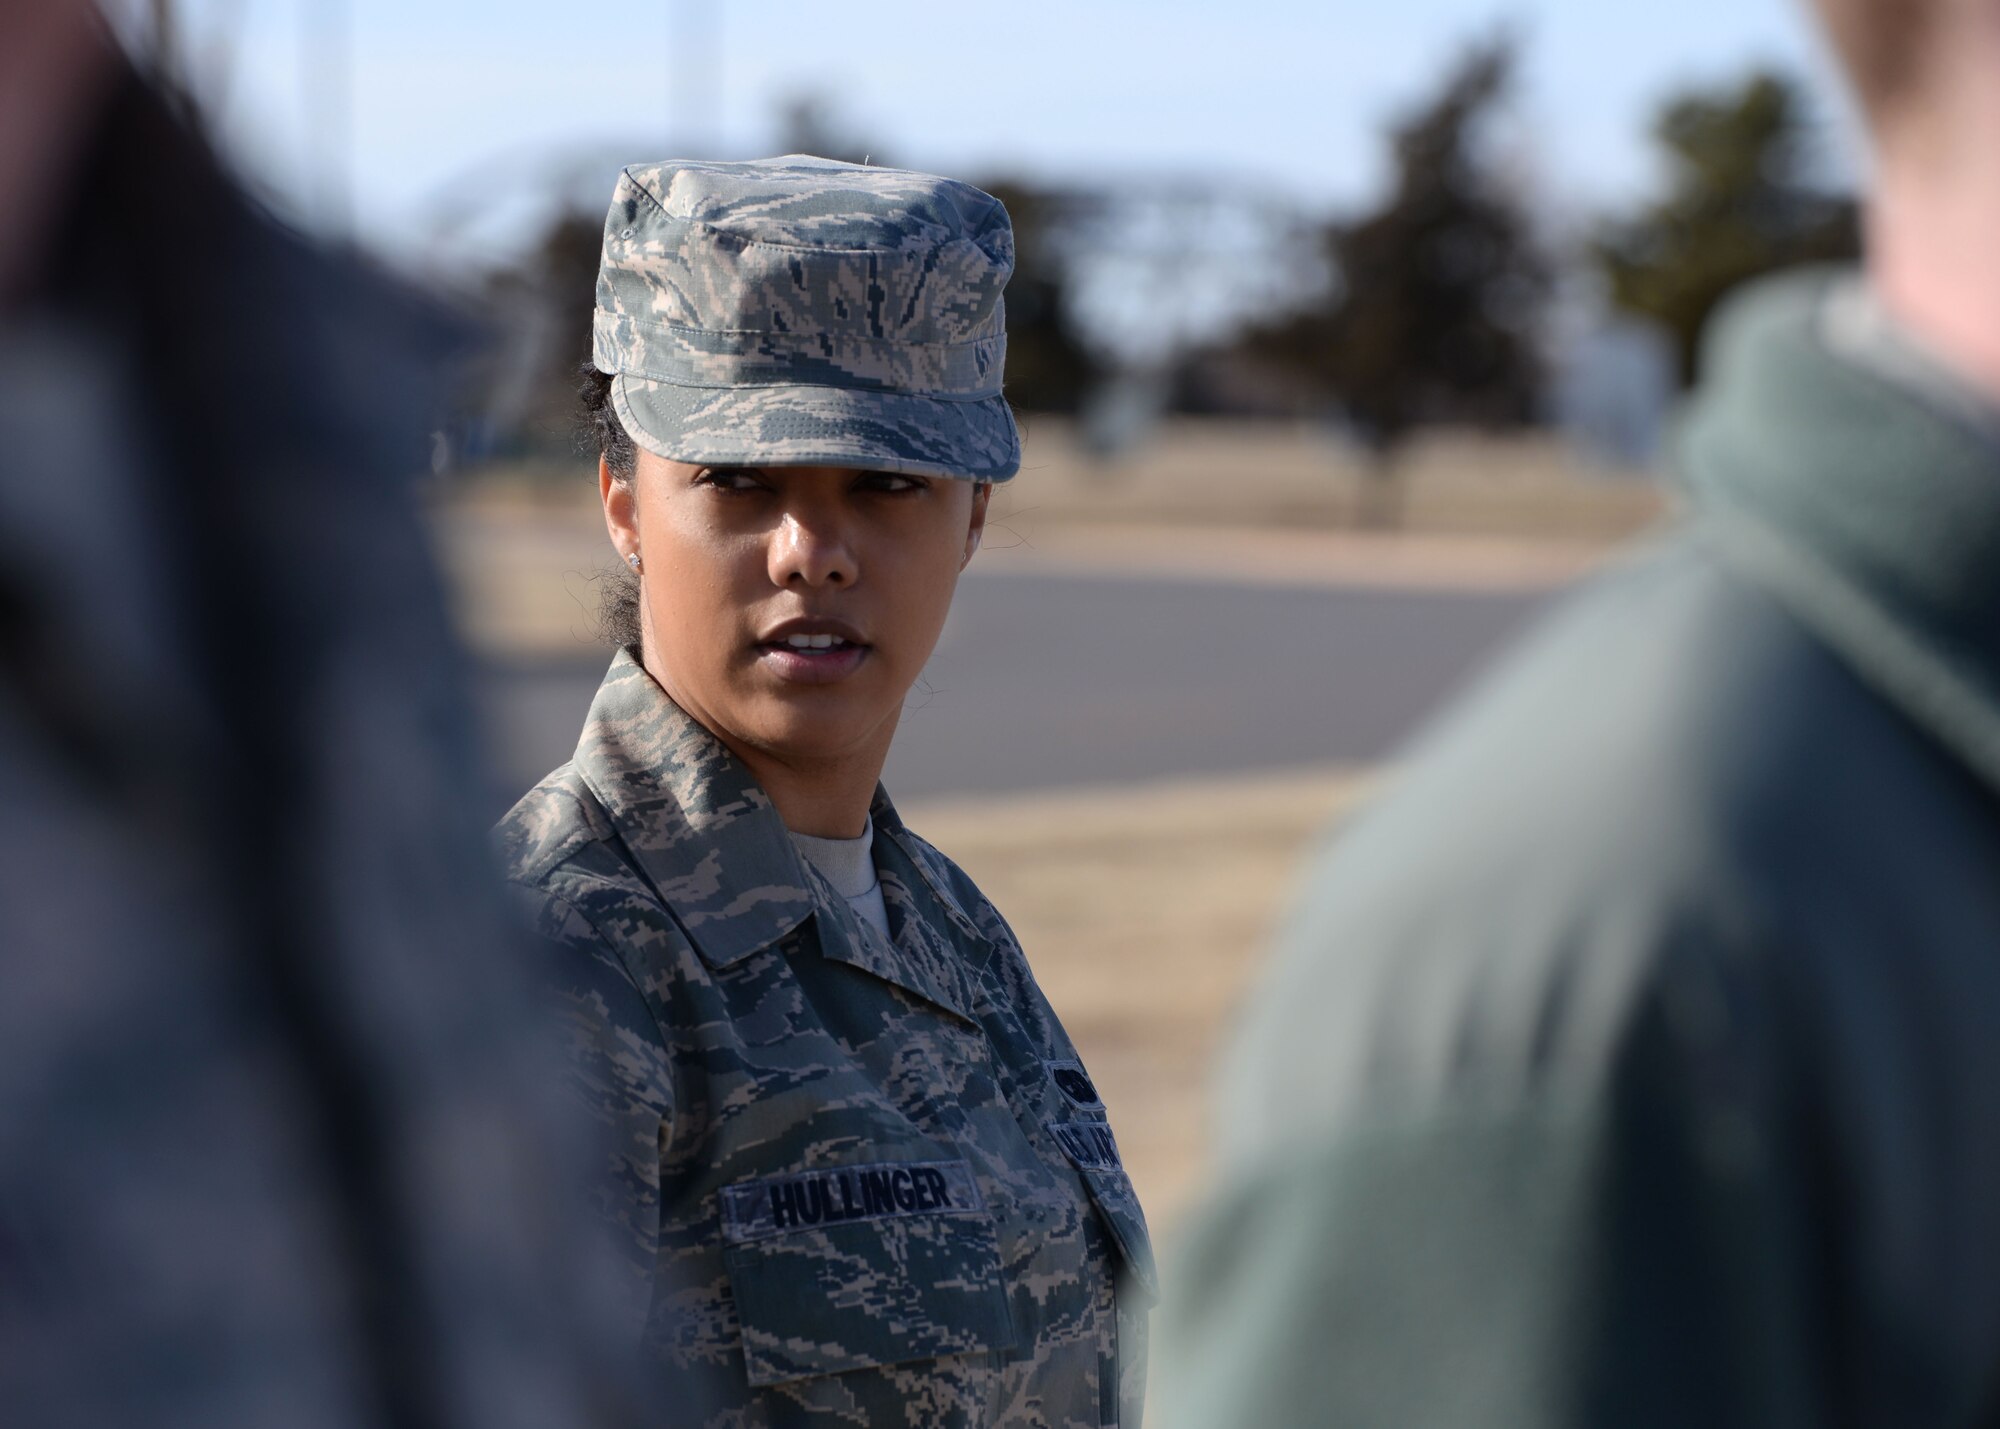 ALTUS AIR FORCE BASE, Okla. – U.S. Air Force Senior Airman Mariah Hullinger, 452nd Logistics Readiness Squadron, inspects her fellow Airmen at the Airman Leadership School parade training area Jan. 15, 2014. Hullinger traveled from March Air Reserve Base, Calif. to attend ALS. Airmen spend five weeks developing leadership abilities and learning to become effective communicators. (U.S. Air Force photo by Senior Airman Levin Boland/Released)